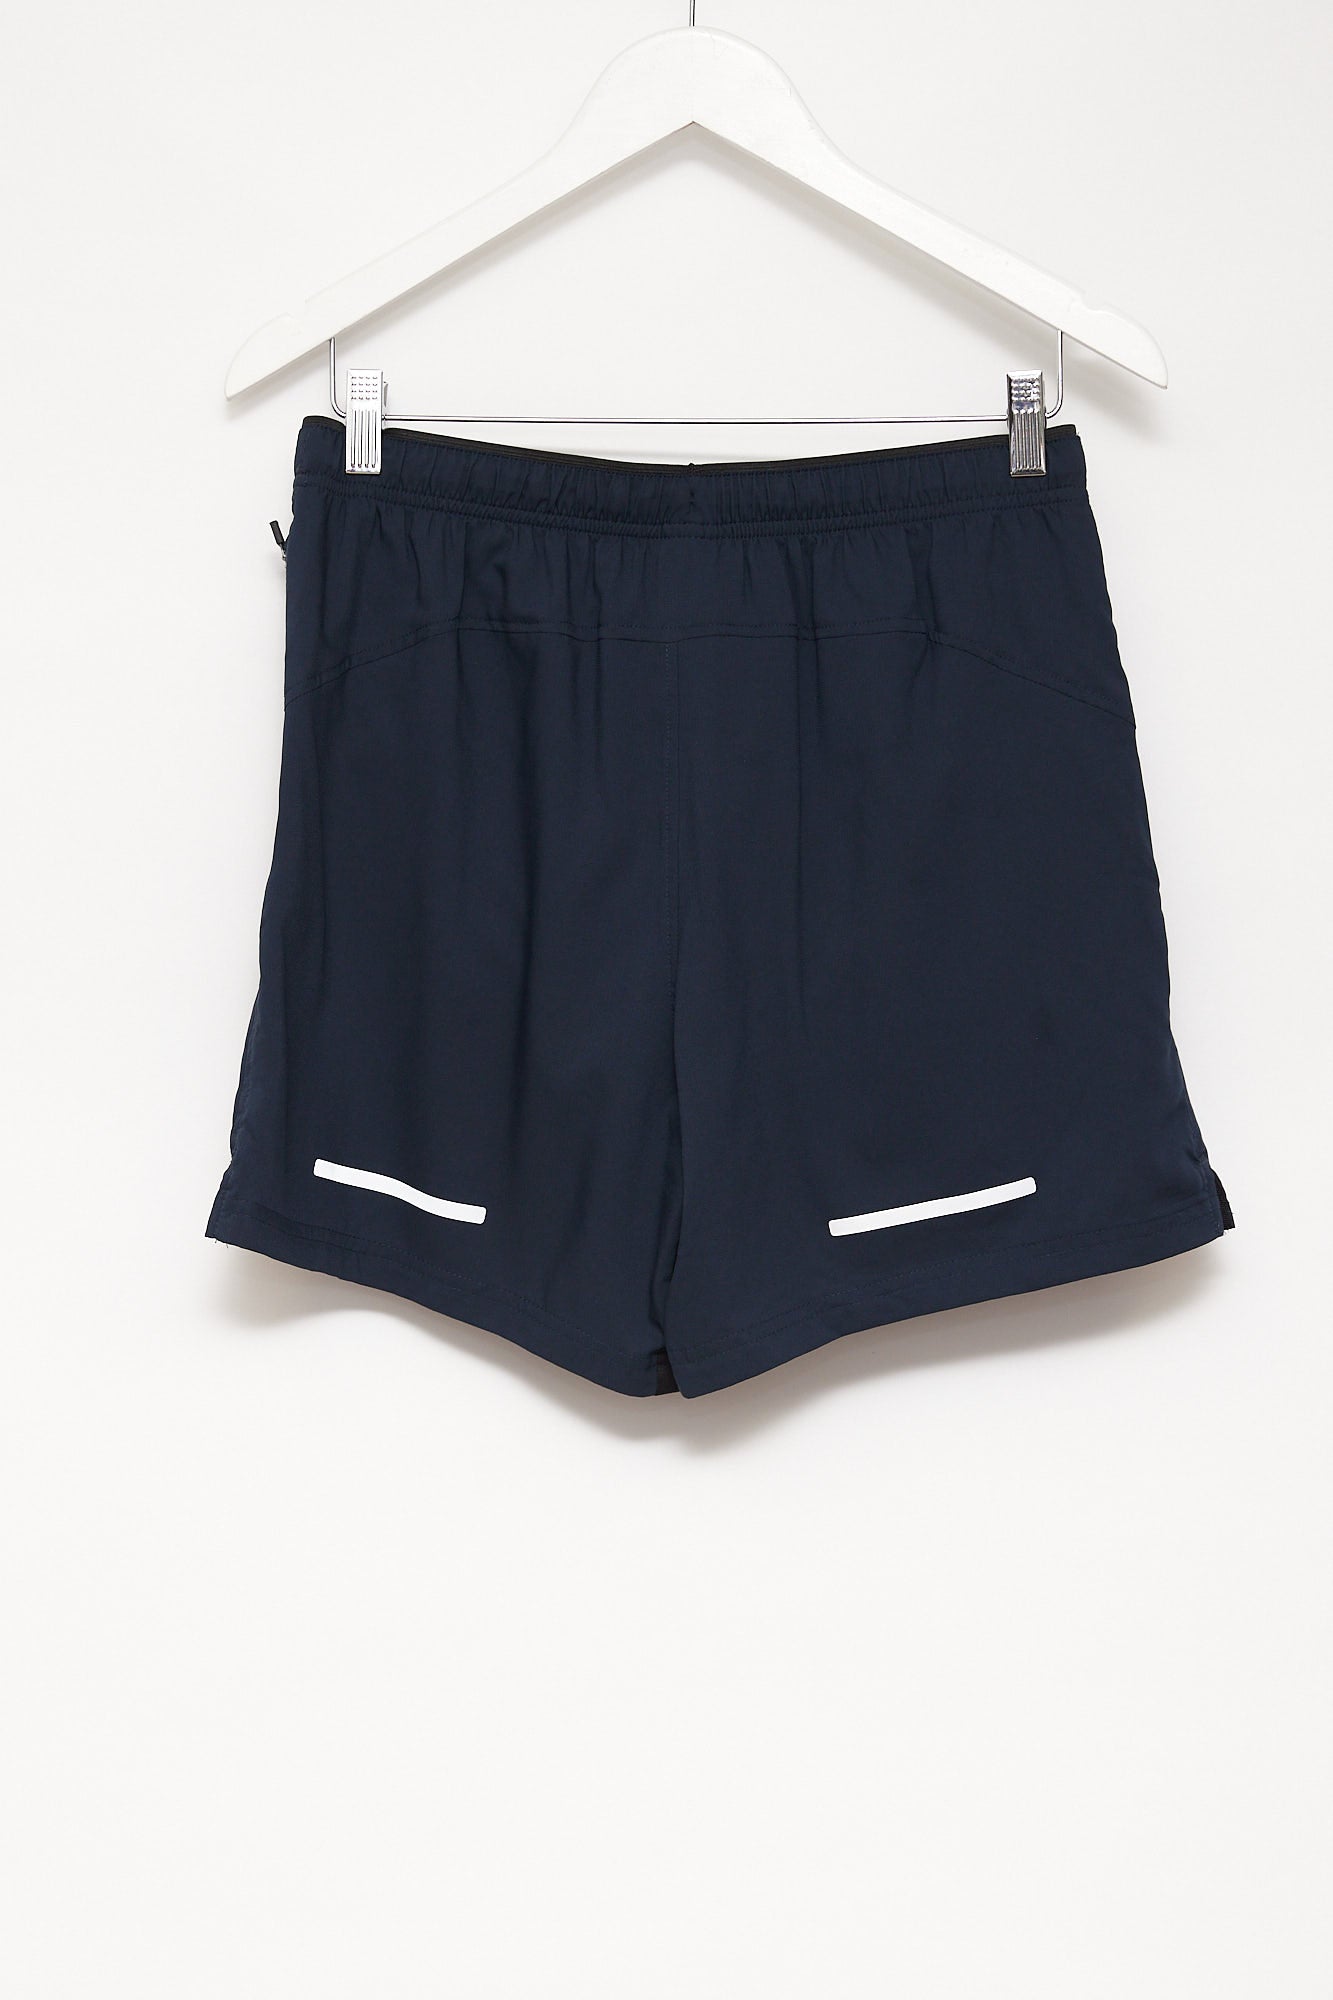 Mens H&M Navy Sport Shorts Size Small